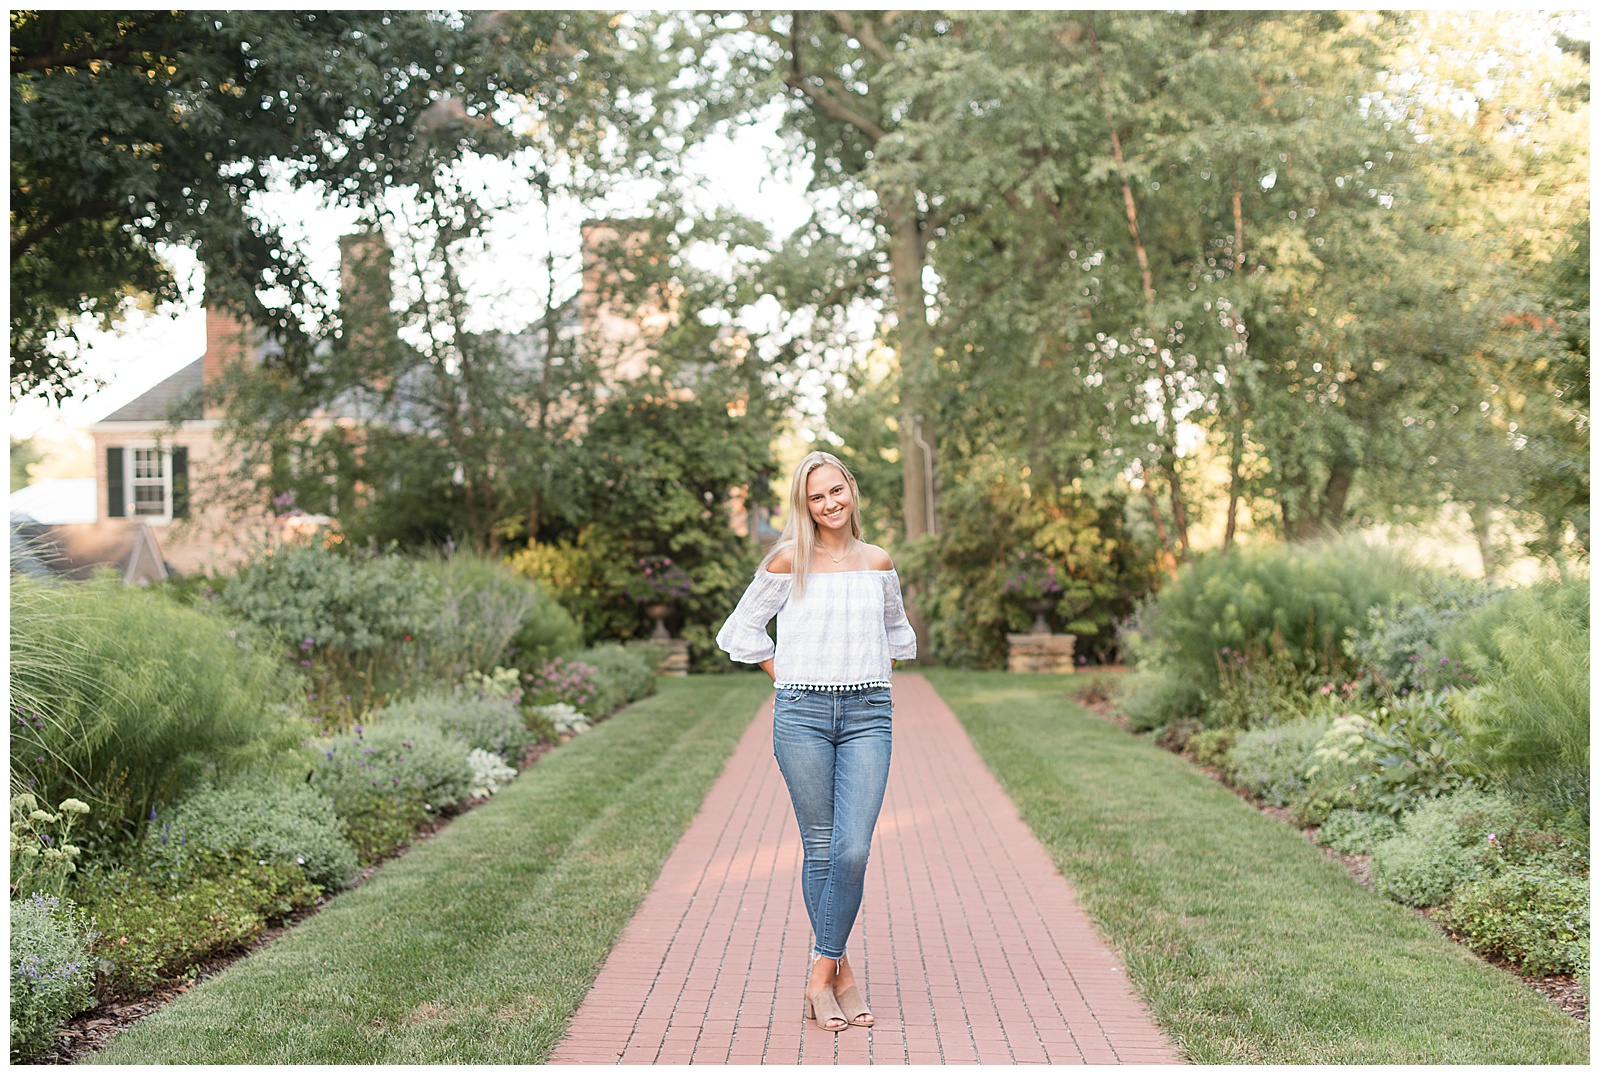 2021 Senior Session at Drumore Estate with senior standing on brick path with hands in pockets and ankles crossed, smiling at camera